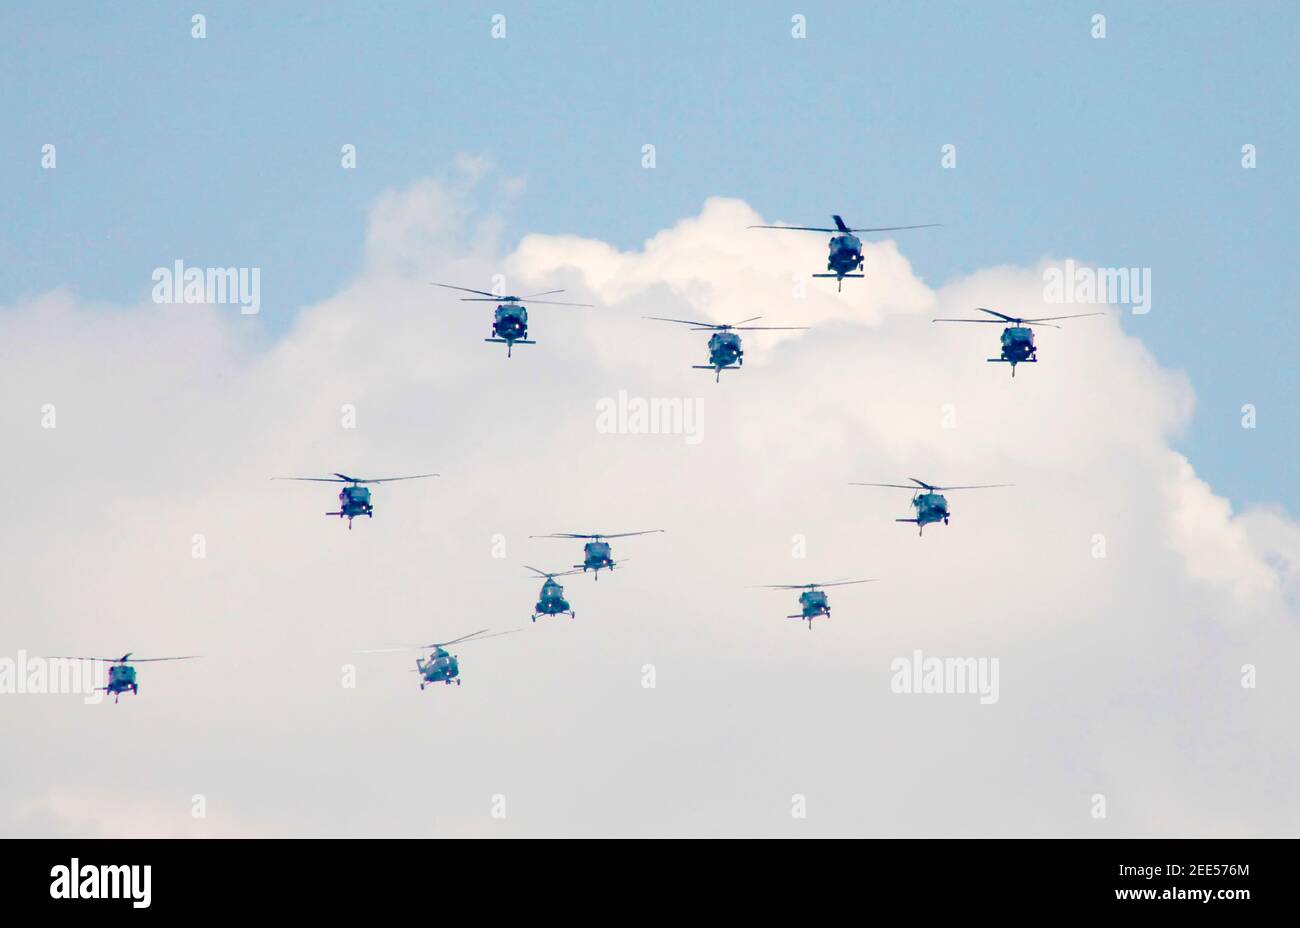 Eleven helicopters in flight approaching as a group Stock Photo